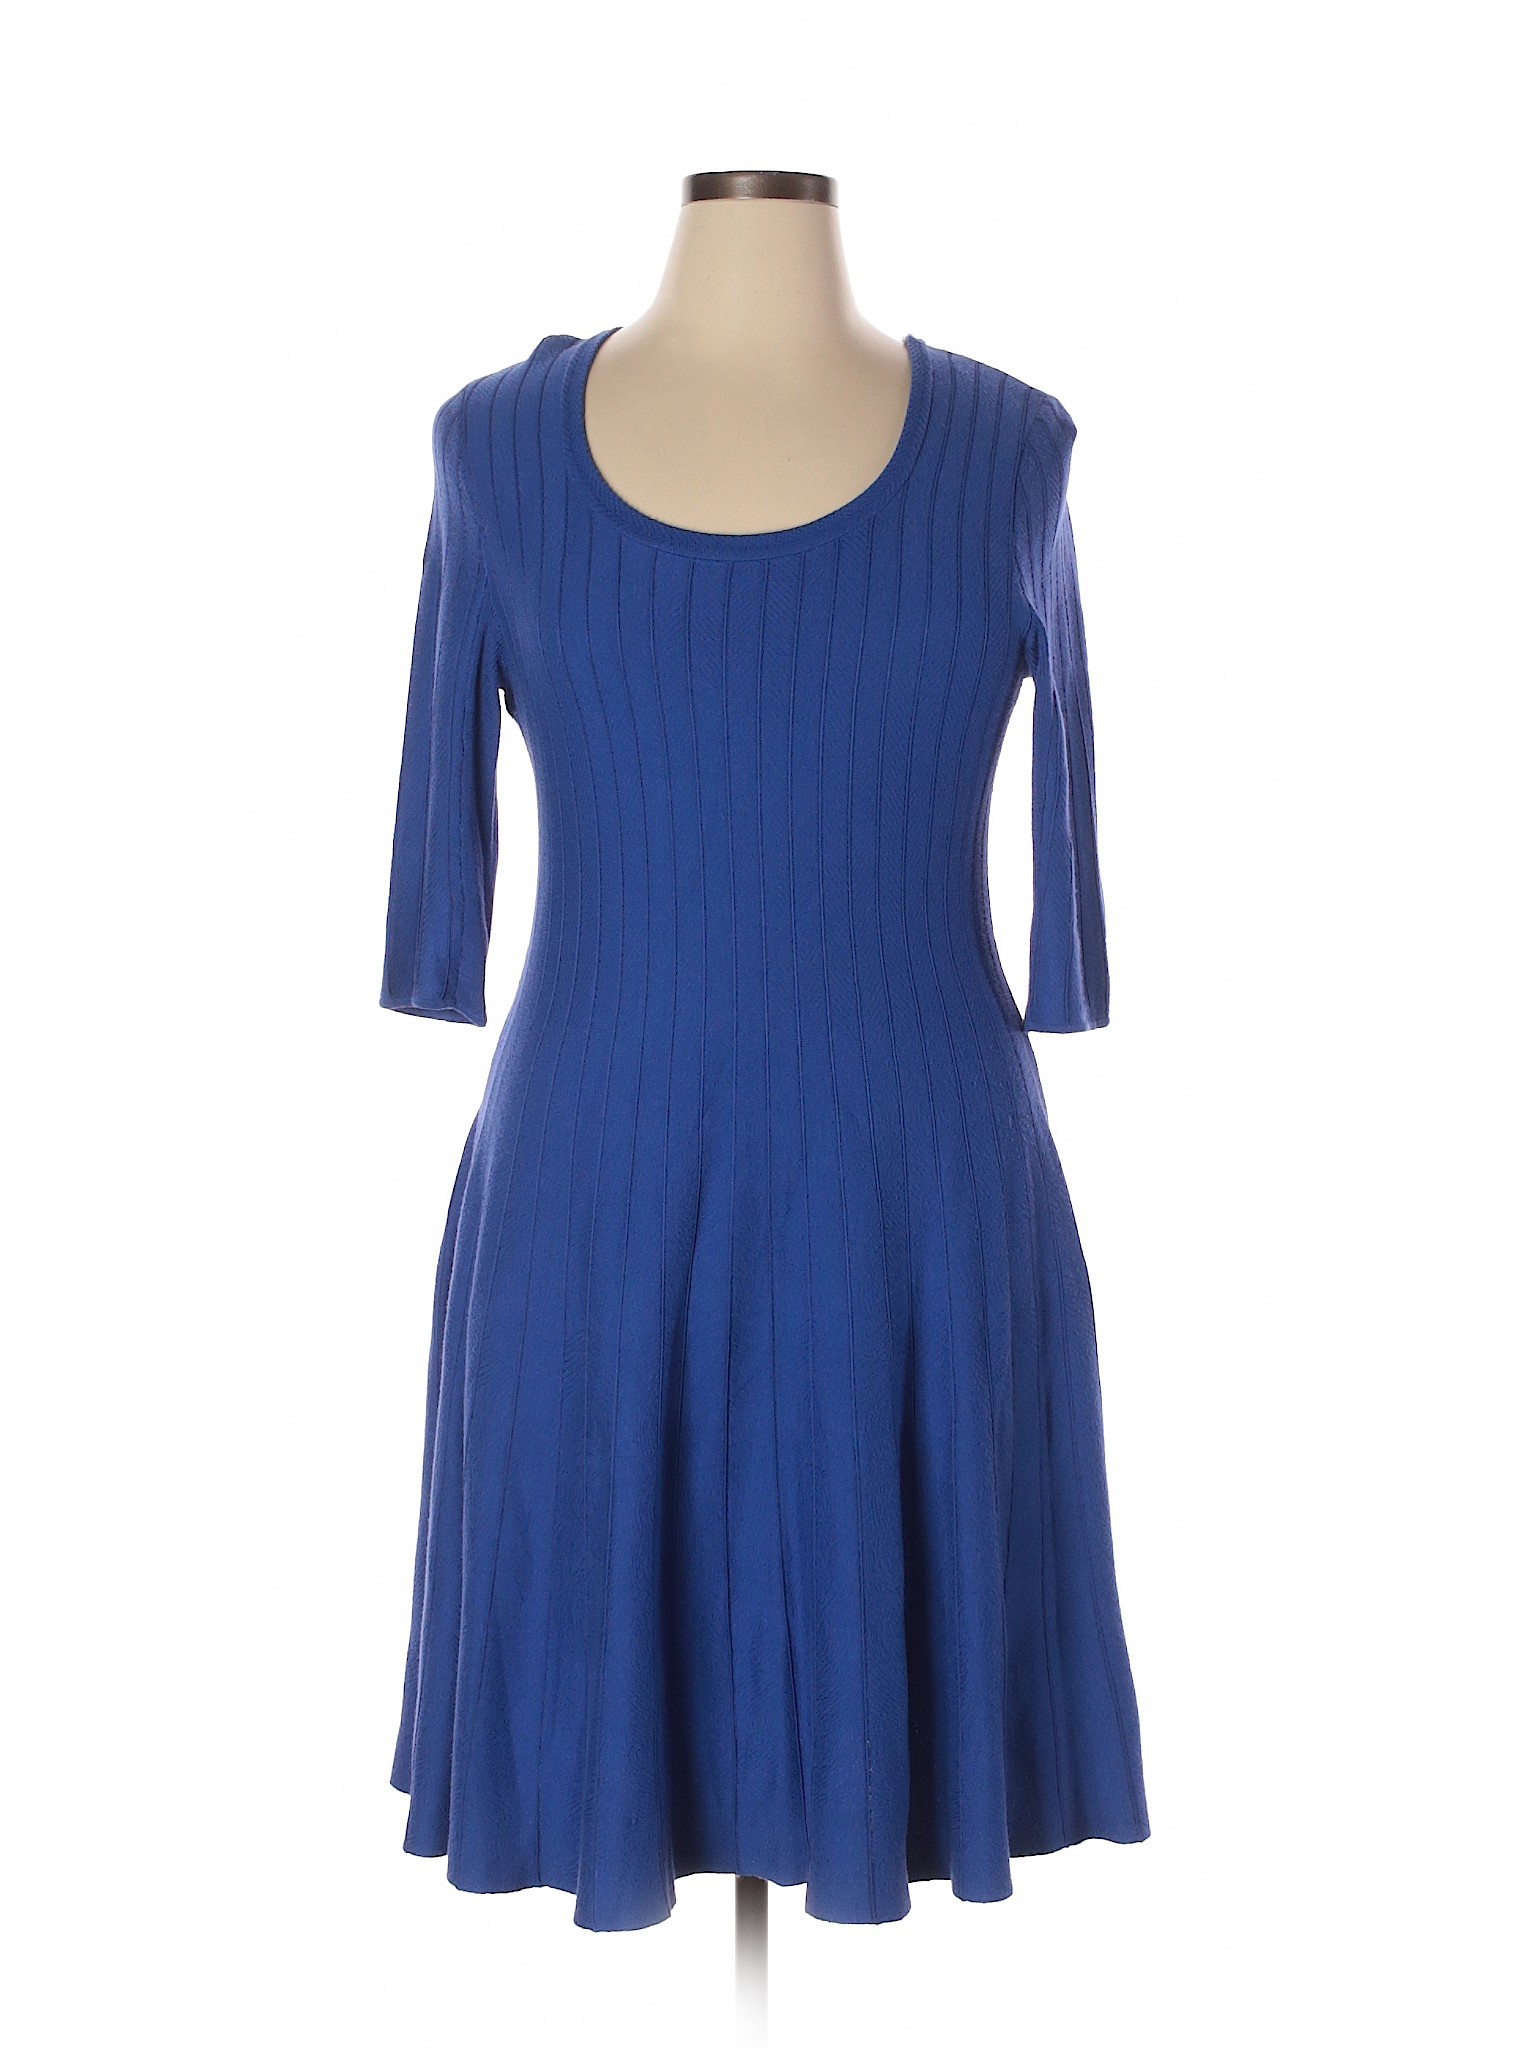 Nic + Zoe Solid Blue Casual Dress Size XL - 77% off | thredUP